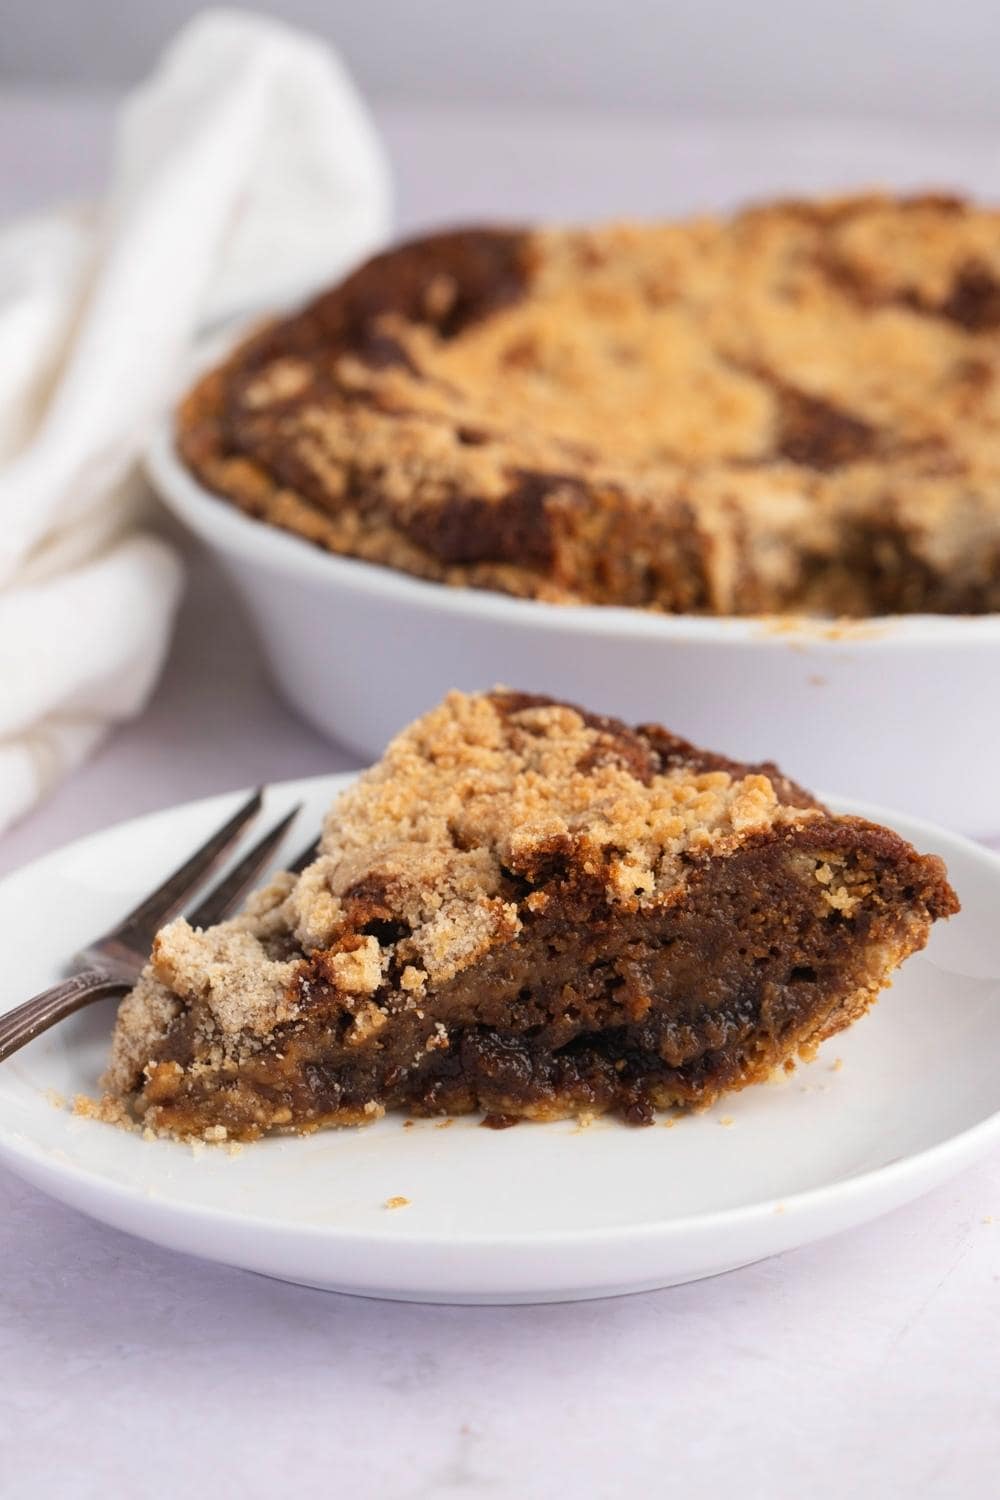 A serving of Gooey Shoofly Pie with molasses filling and crumbly toppings.